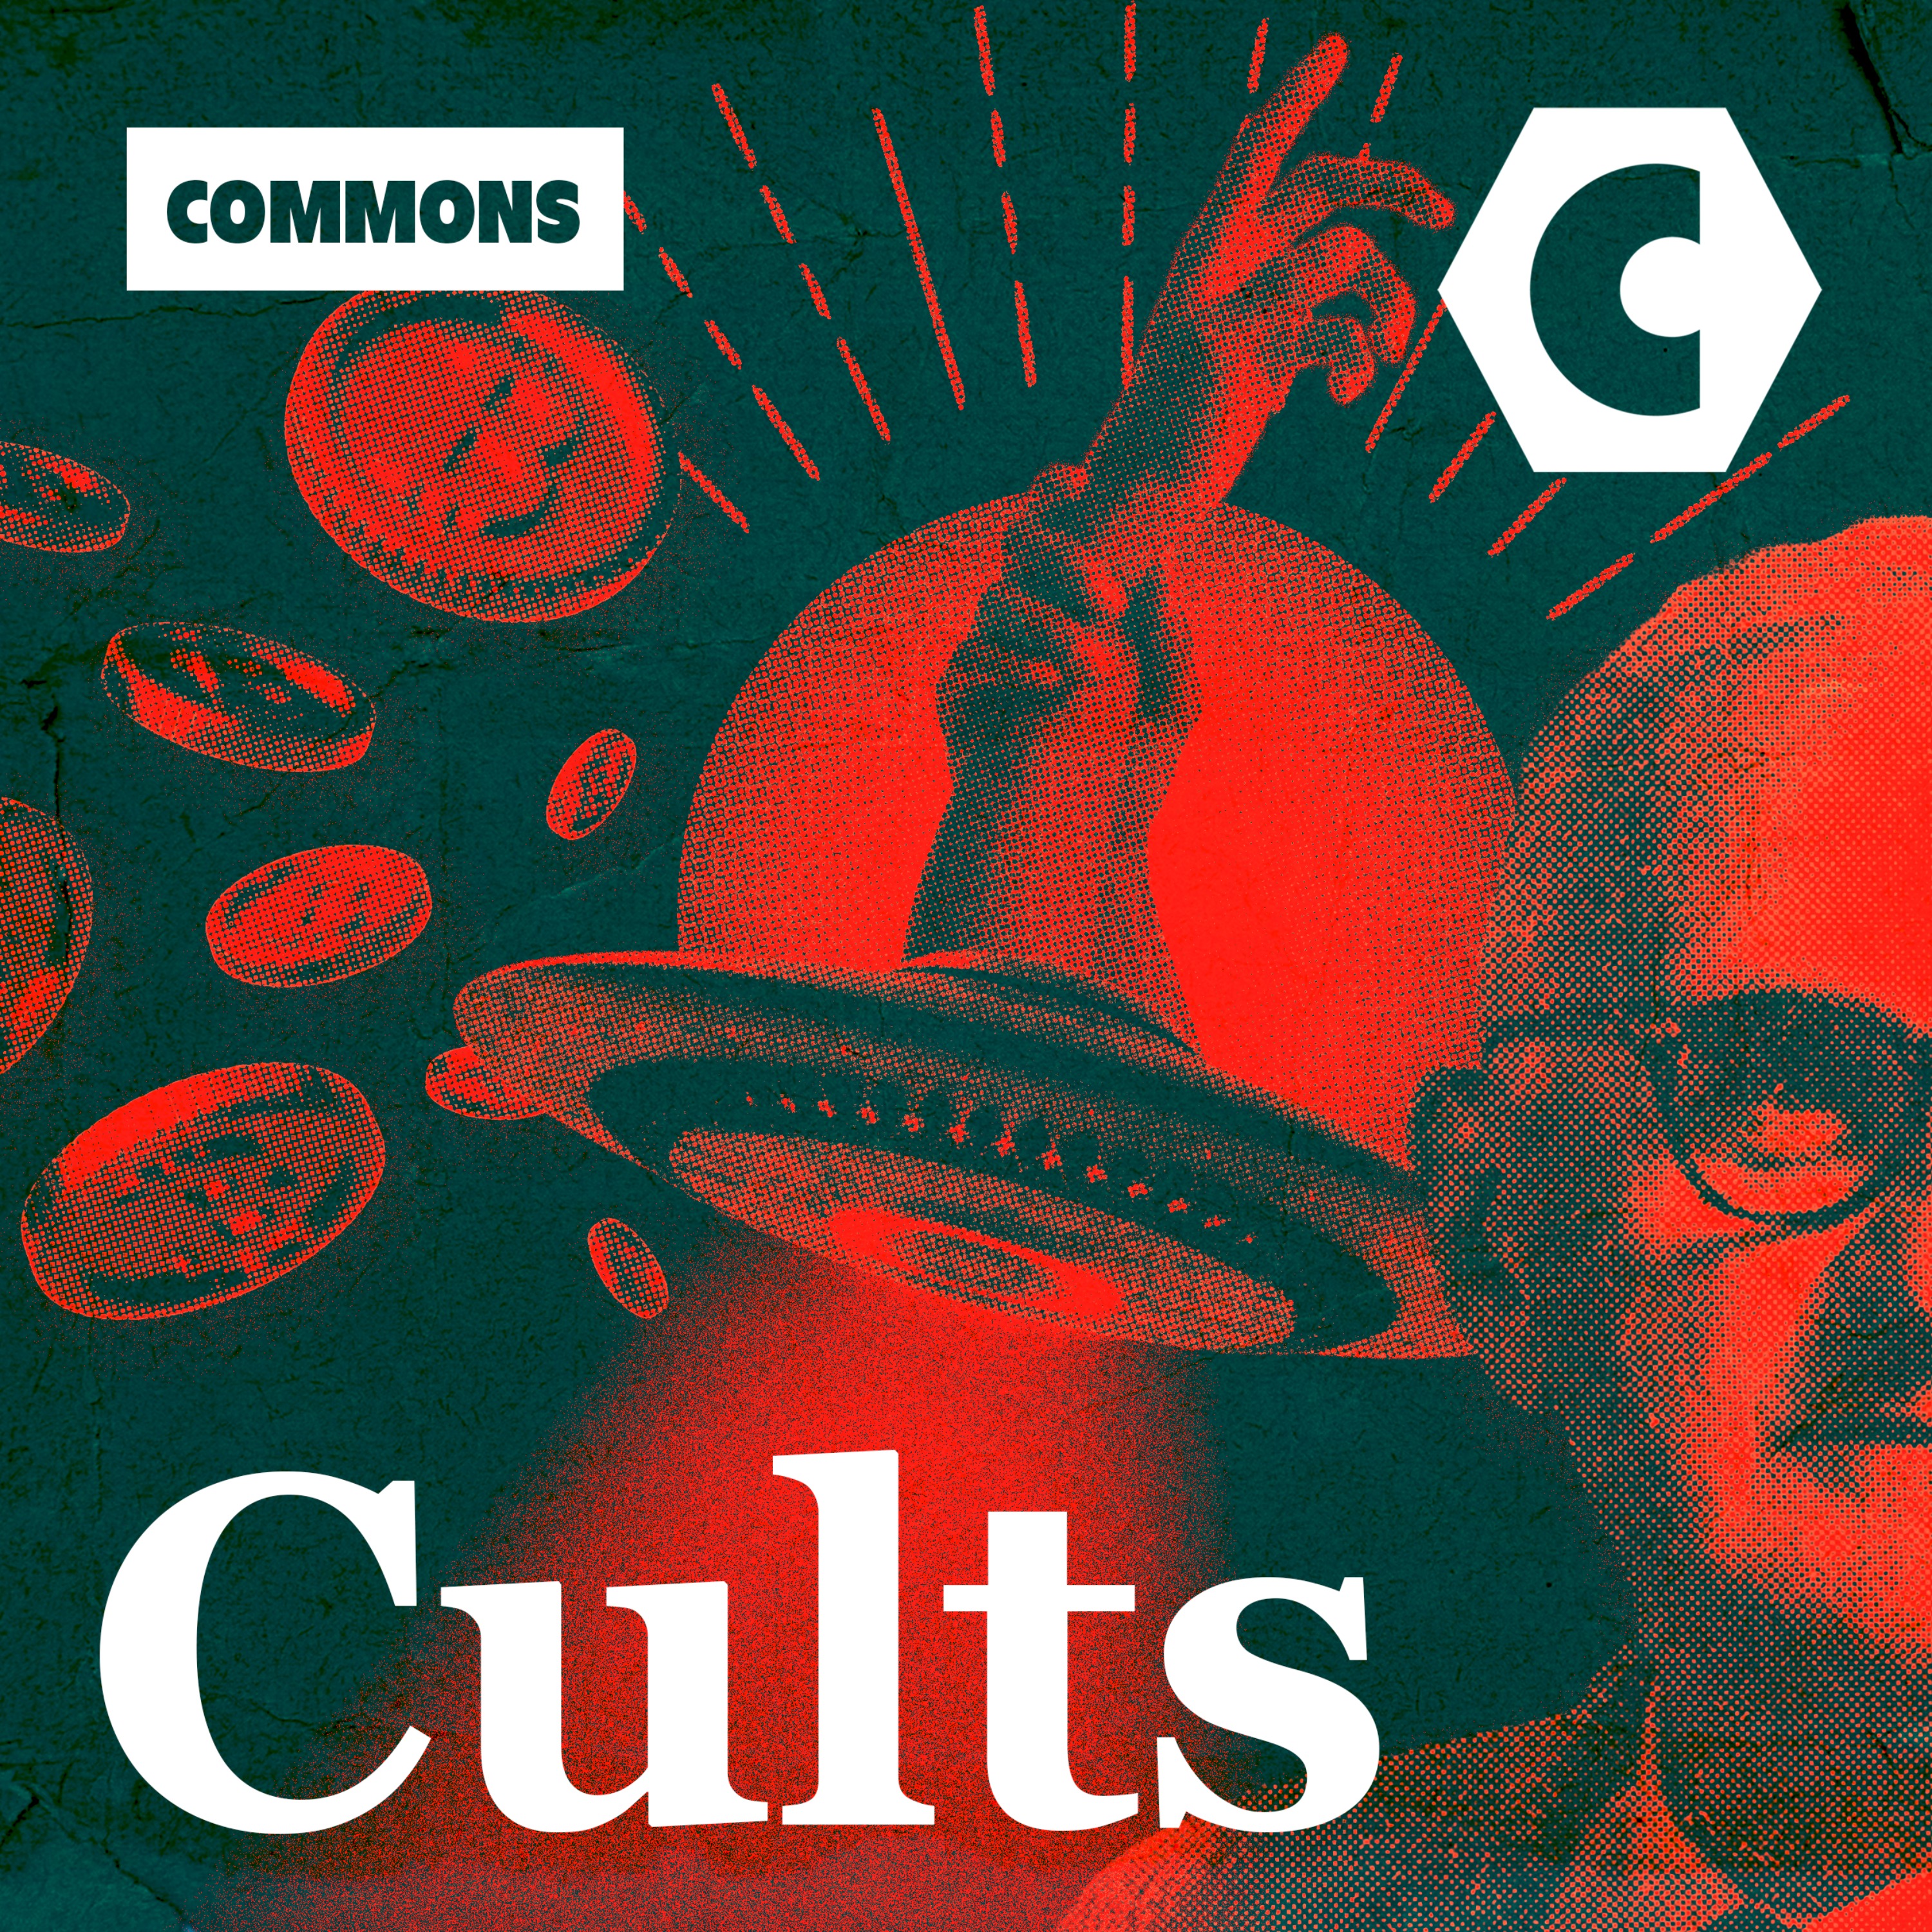 CULTS 4 - The Cult Wars